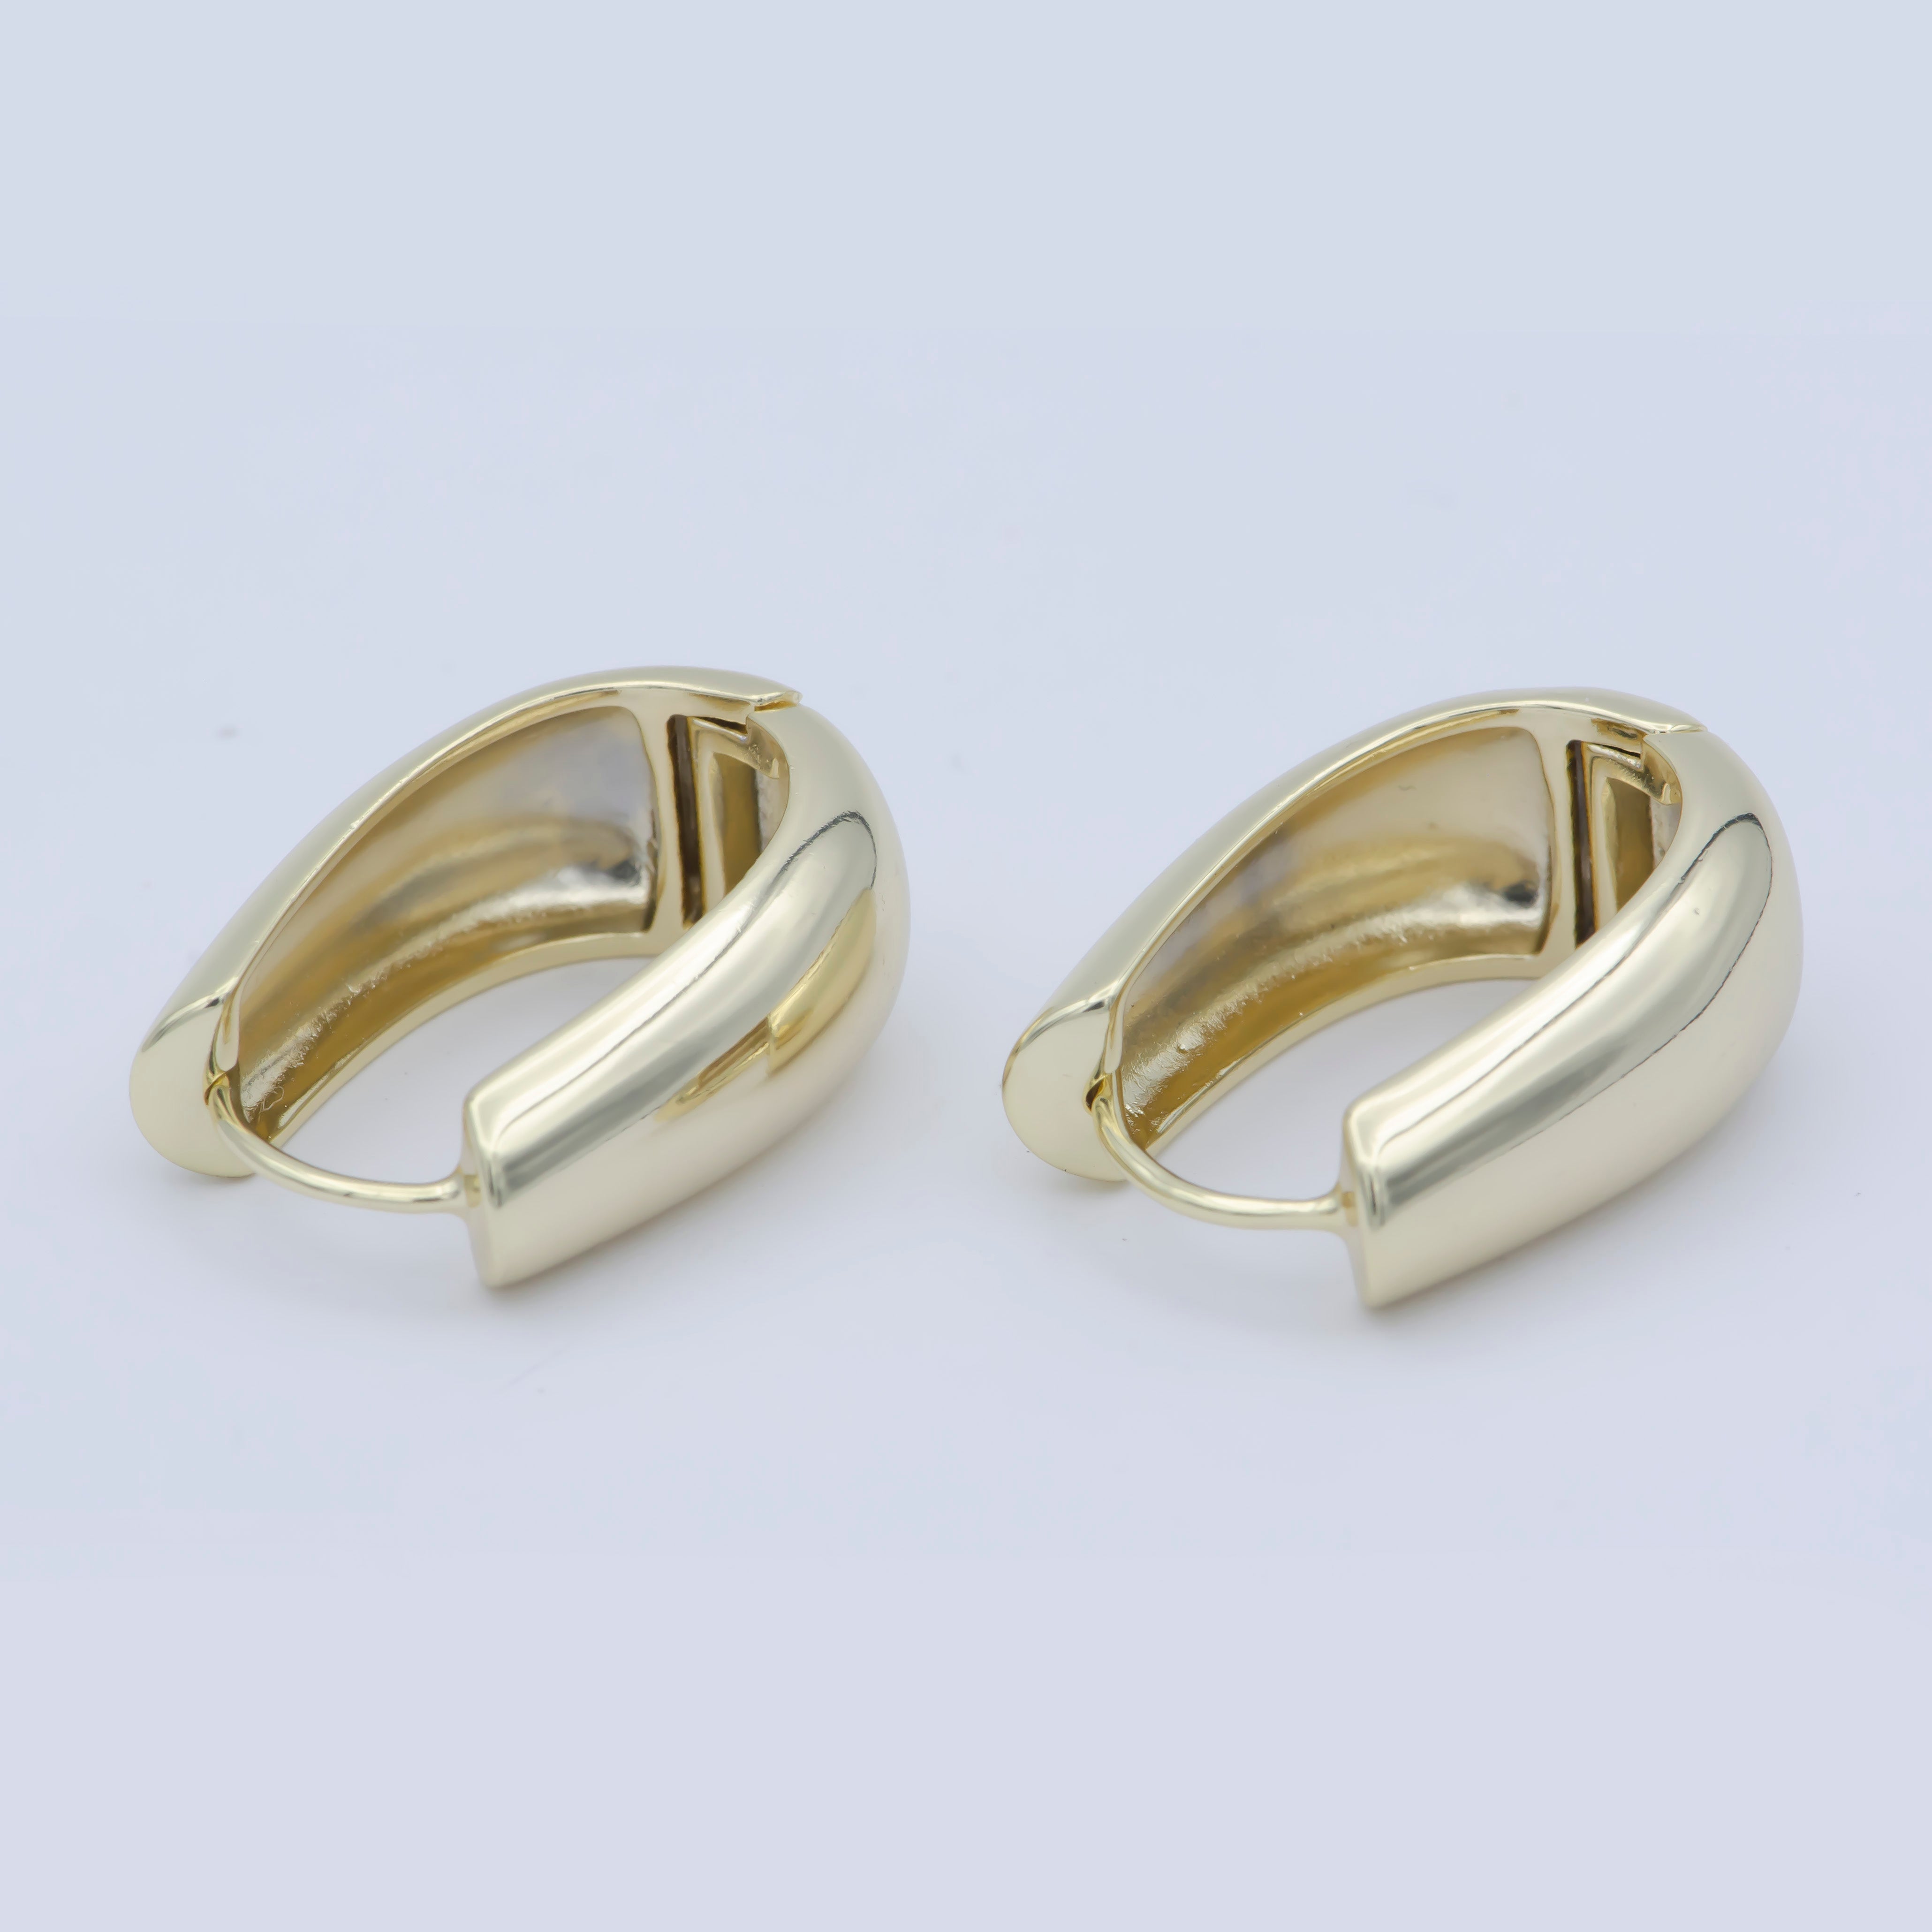 14k Gold Filled Oval Hoop Earrings | Large Thick Hoop Earring for Everyday Wear - DLUXCA